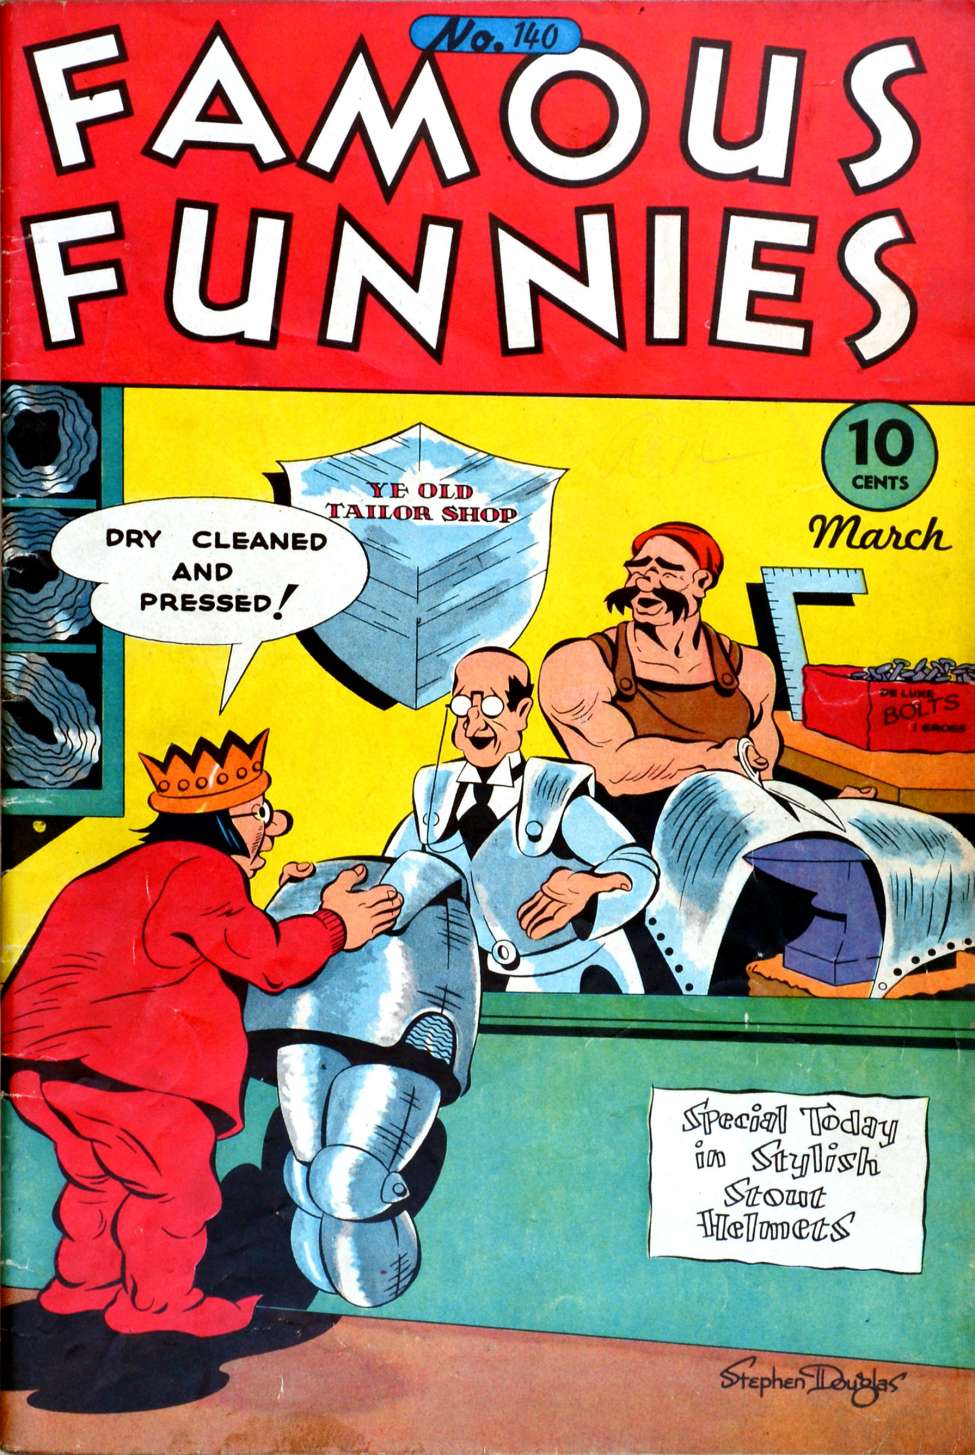 Comic Book Cover For Famous Funnies 140 - Version 2